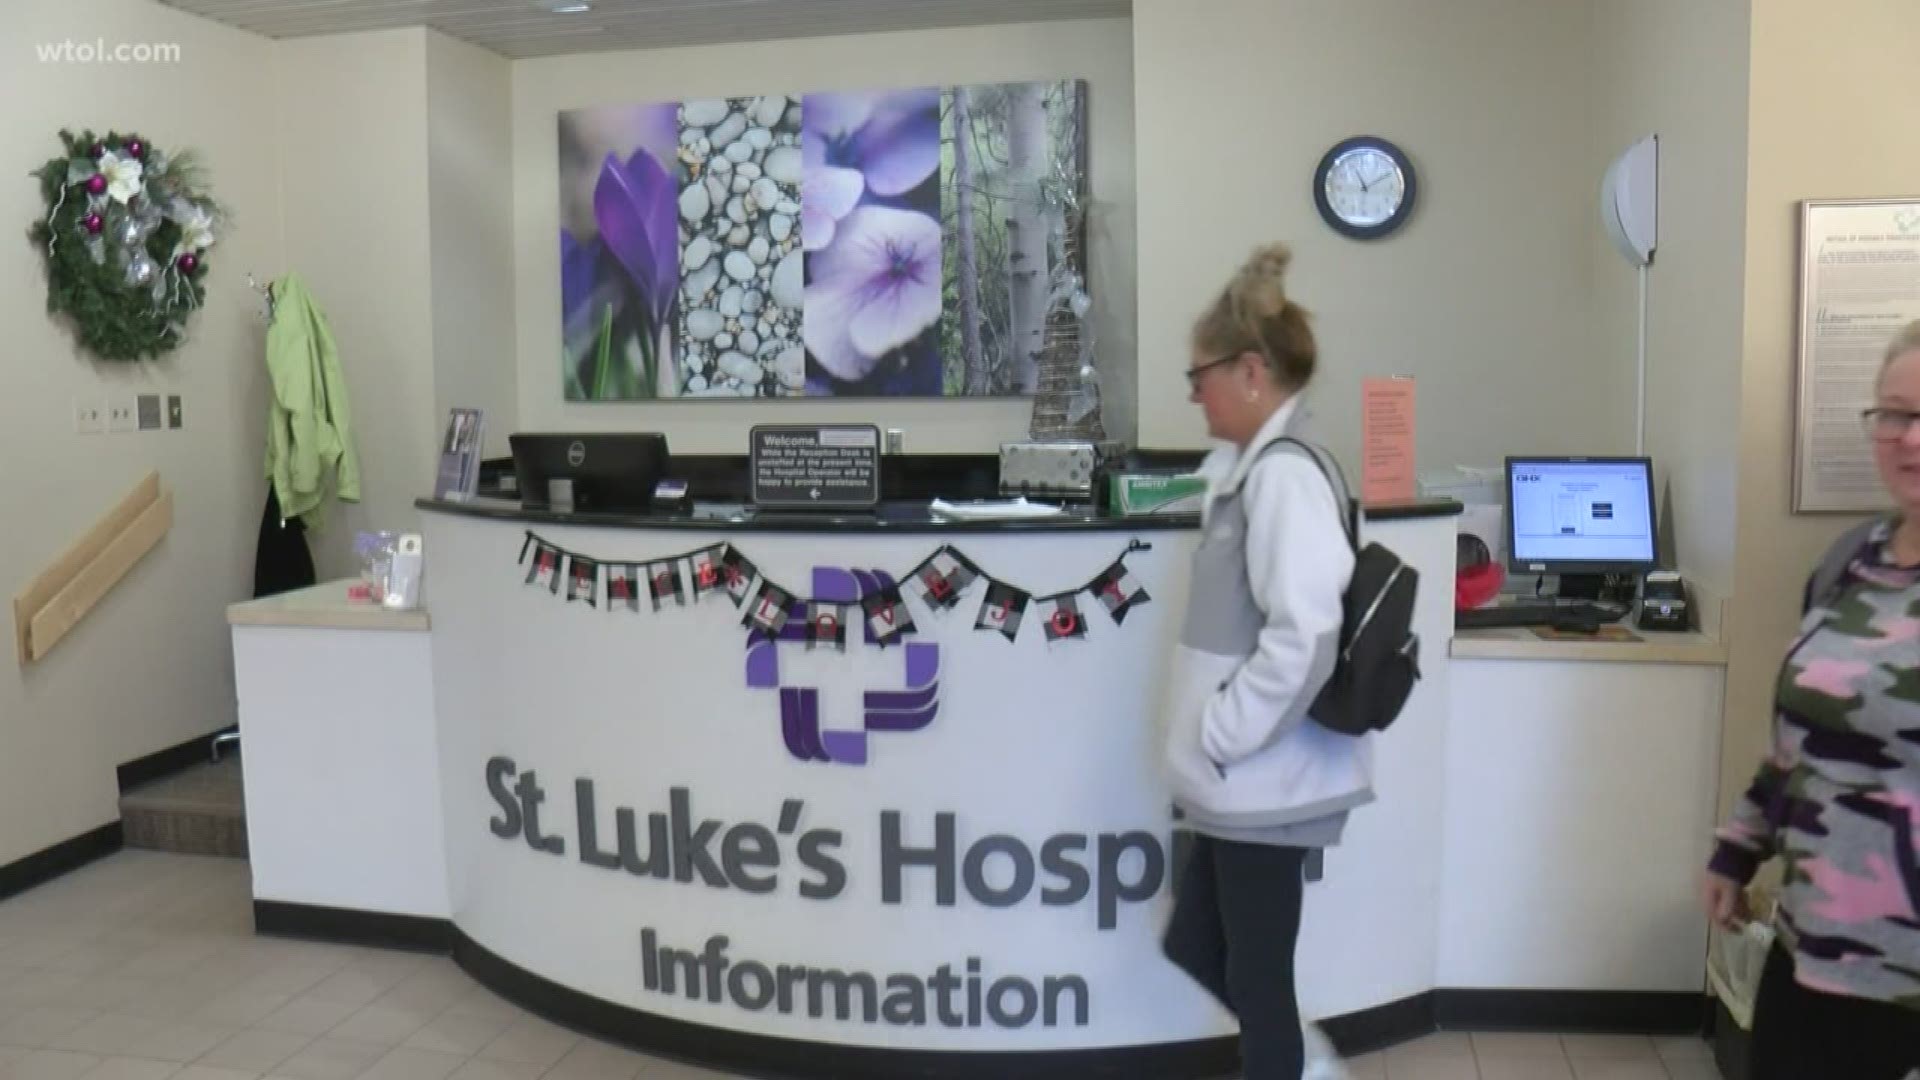 'Significant investments' for the Maumee hospital are planned, including a cancer center, spine center and infrastructure updates.